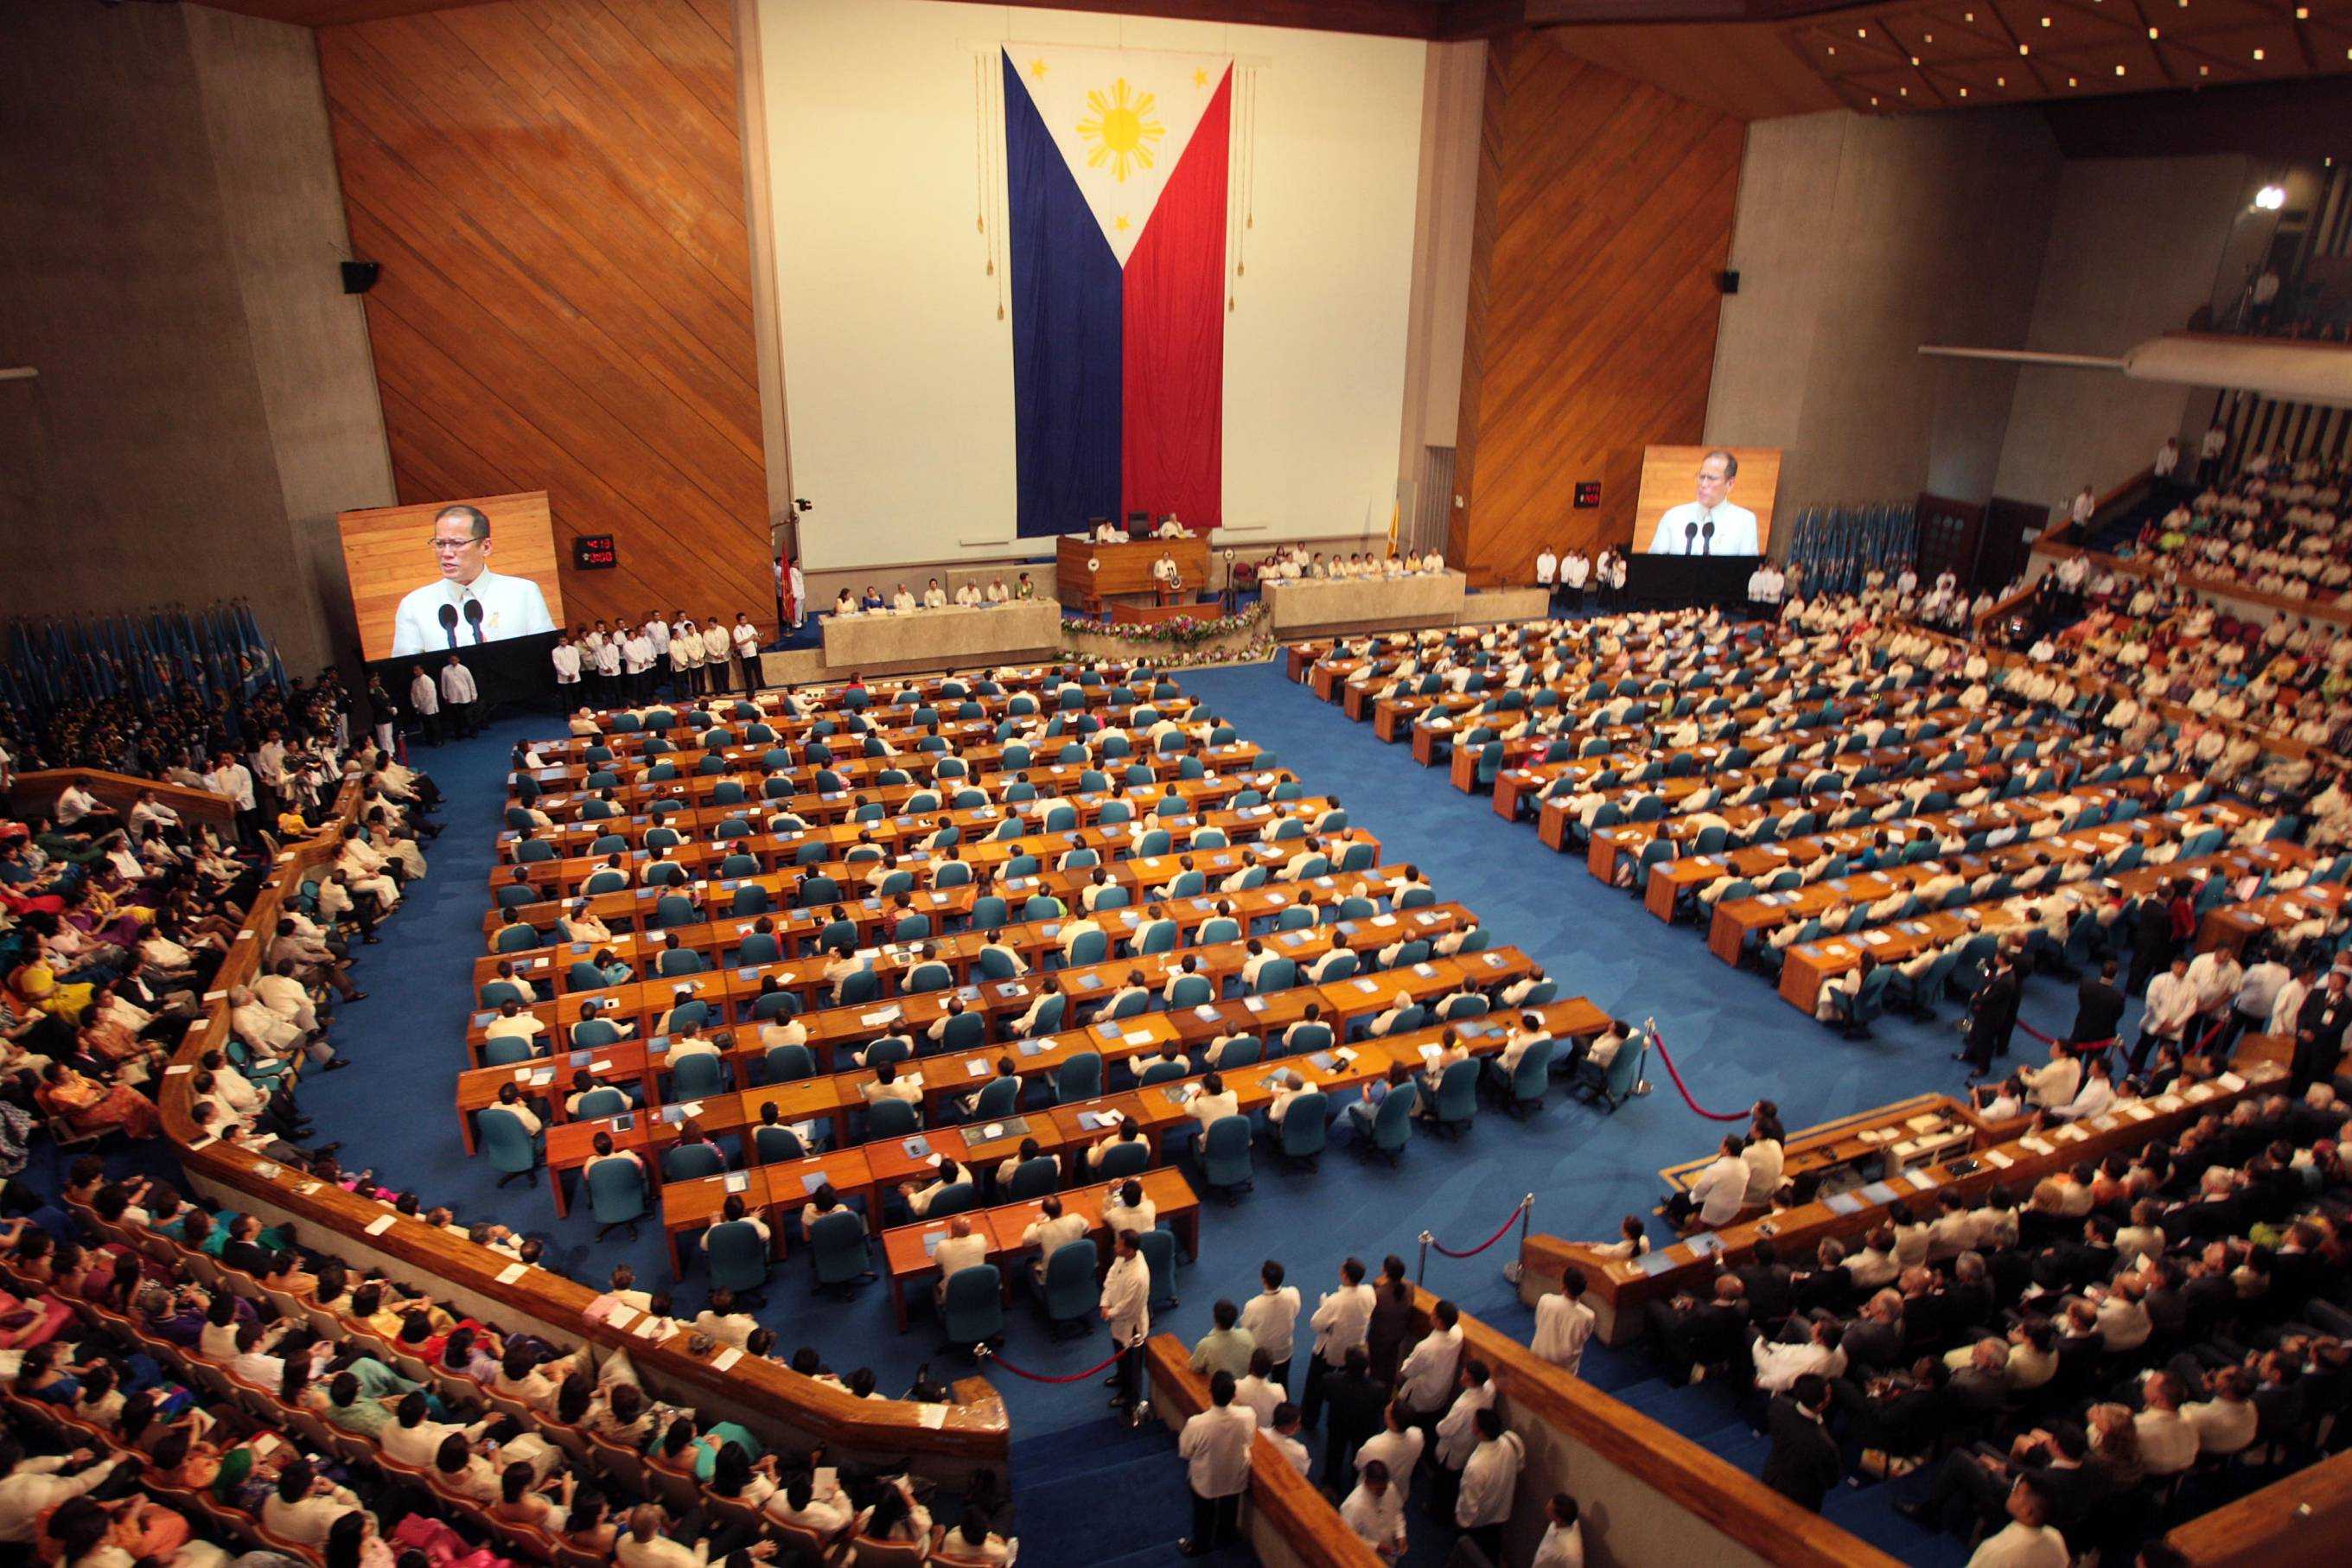 House approves immediate burial of Muslims under Islamic rites